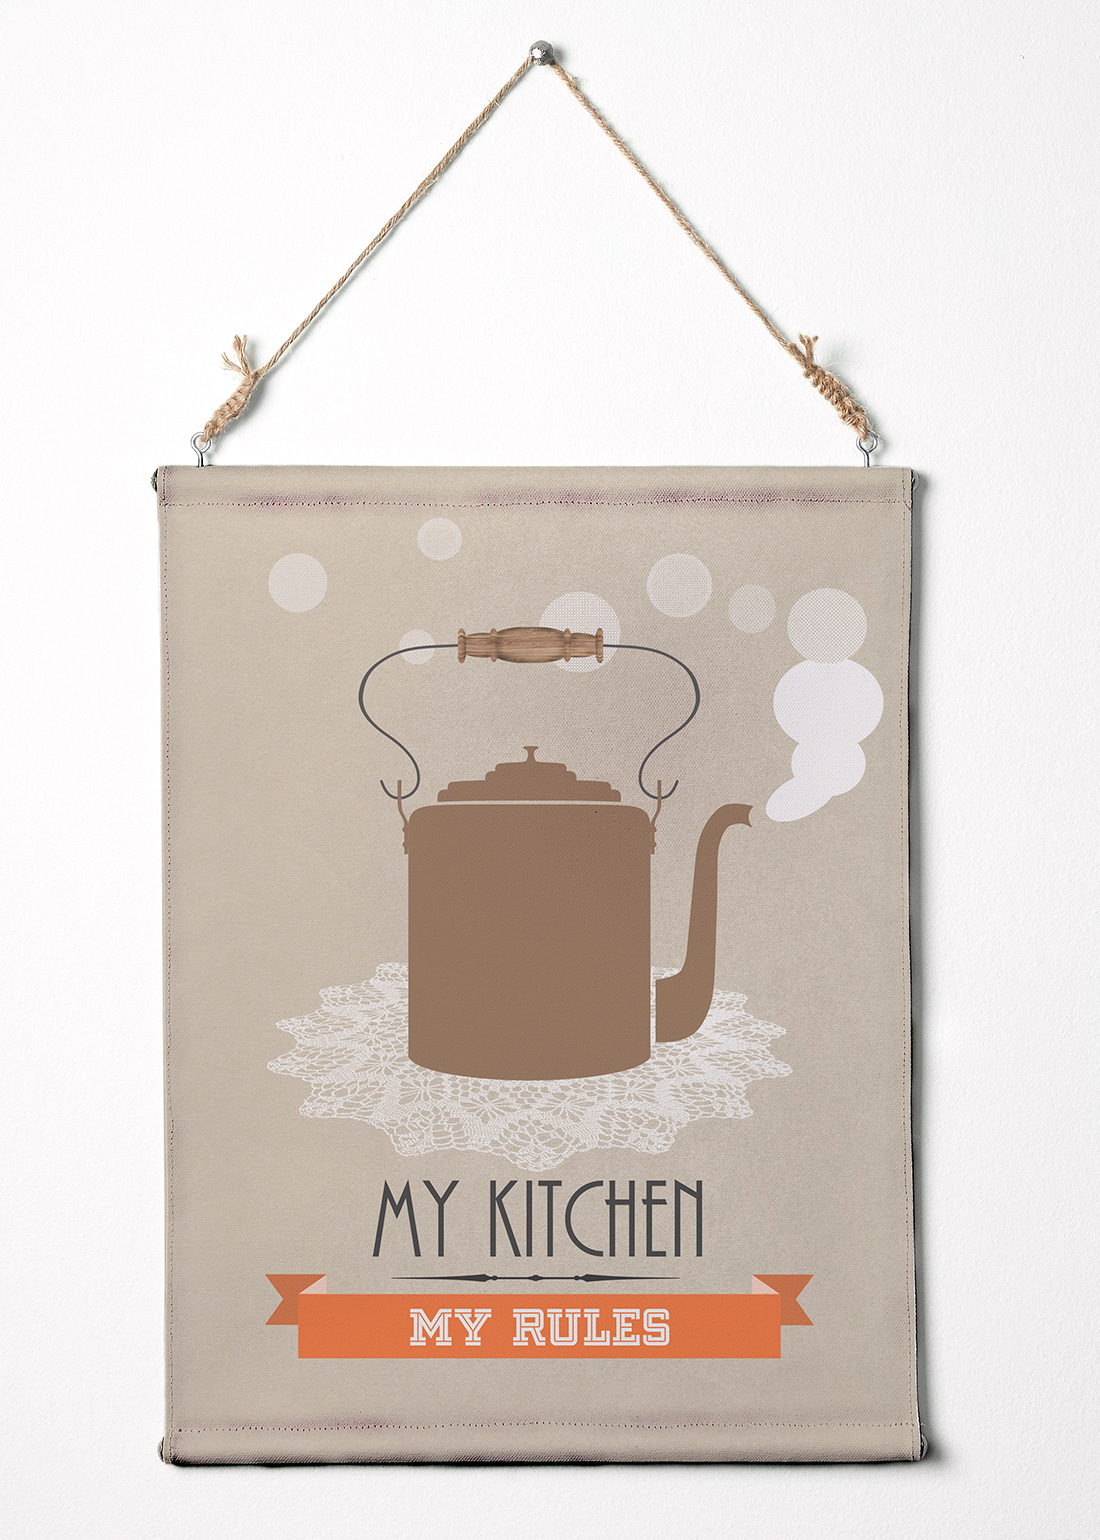 My Kitchen My Rules. Print On Canvas. Wall Hanging. 12.5" X 16.5"